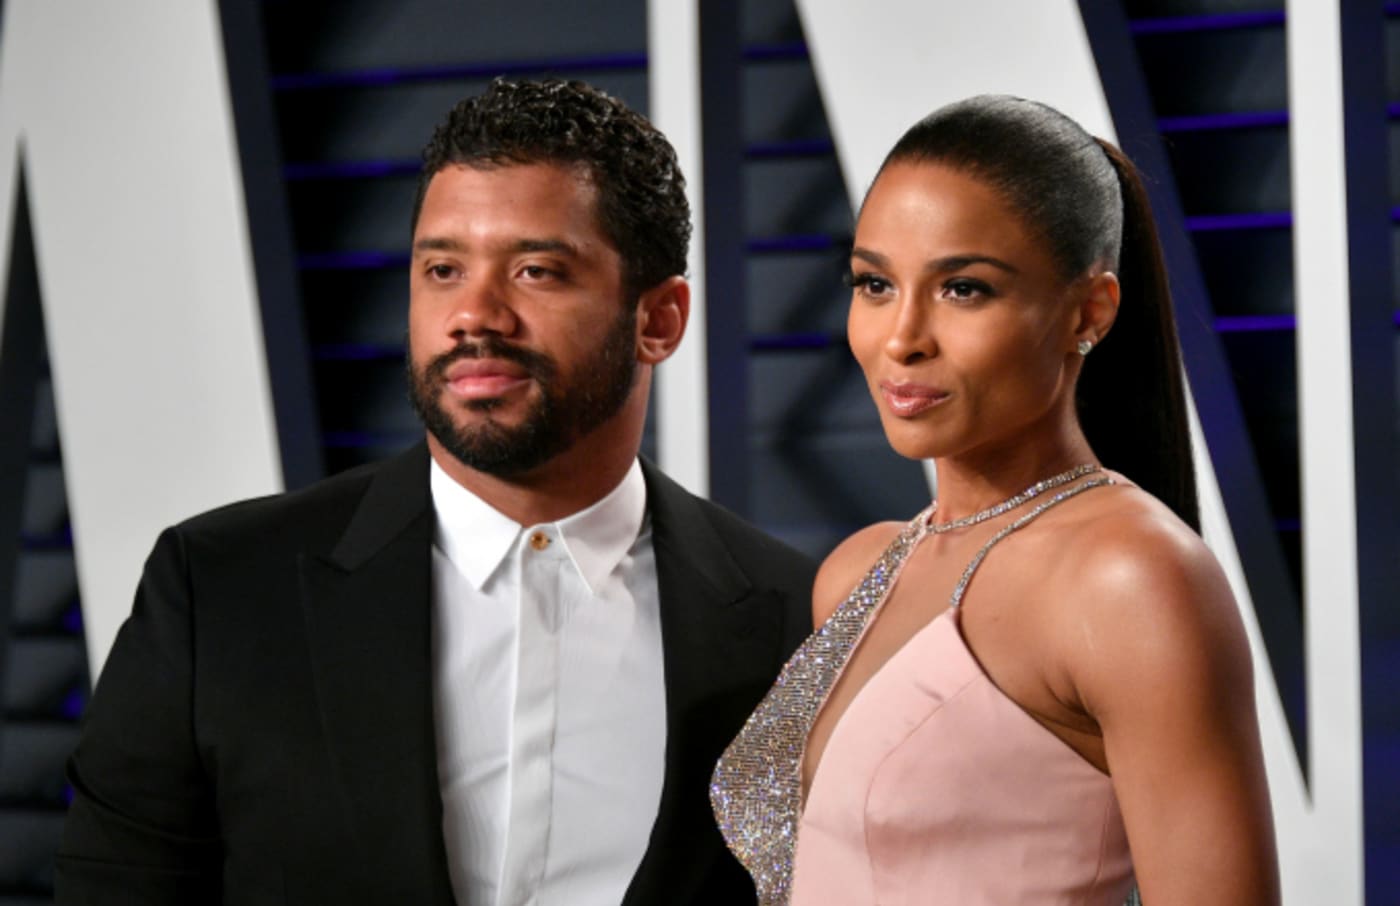 Russell Wilson (L) and Ciara